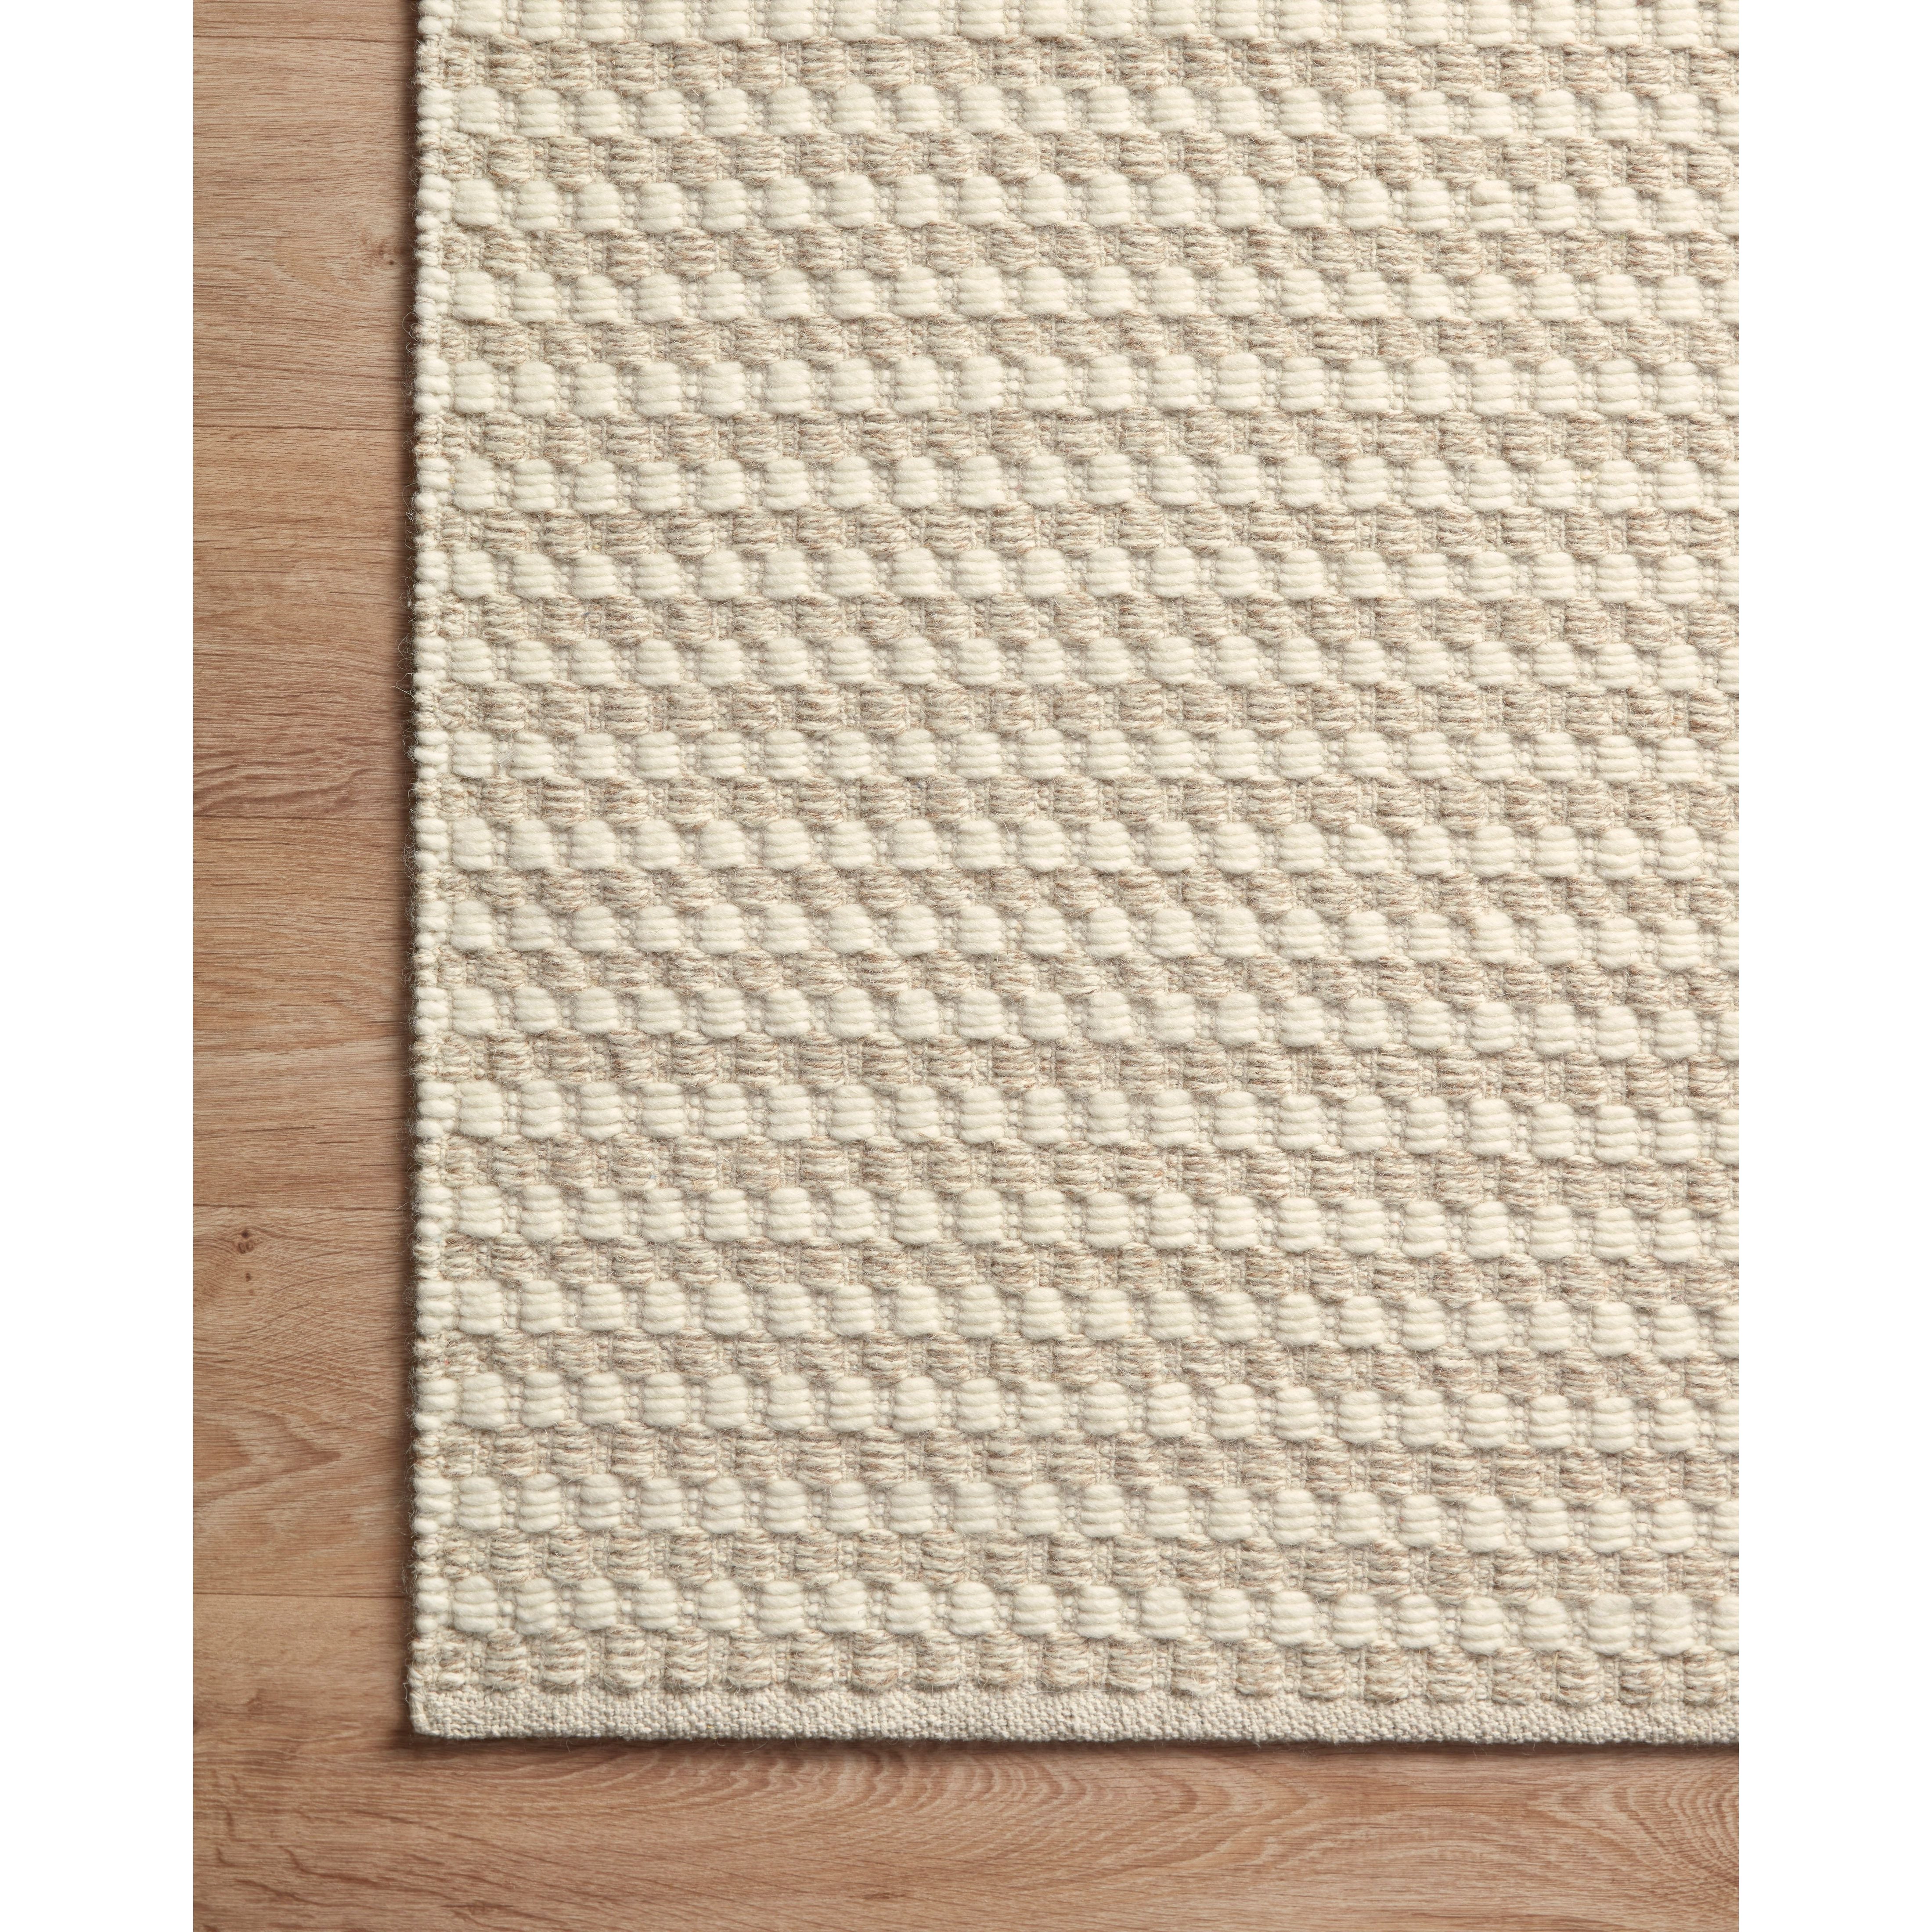 Hand-loomed of wool and cotton in India, the Ojai Collection for Amber Lewis x Loloi offers a series of understated neutrals that feels at once refined and relaxed. Ojai serves a timeless foundation that is sure to bring an elevated yet comfortable feel to any room. Ojai is also GoodWeave-Certified, ensuring our commitment to ethical product and the support of weavers' communities. OJA-01 AL Ivory / Natural